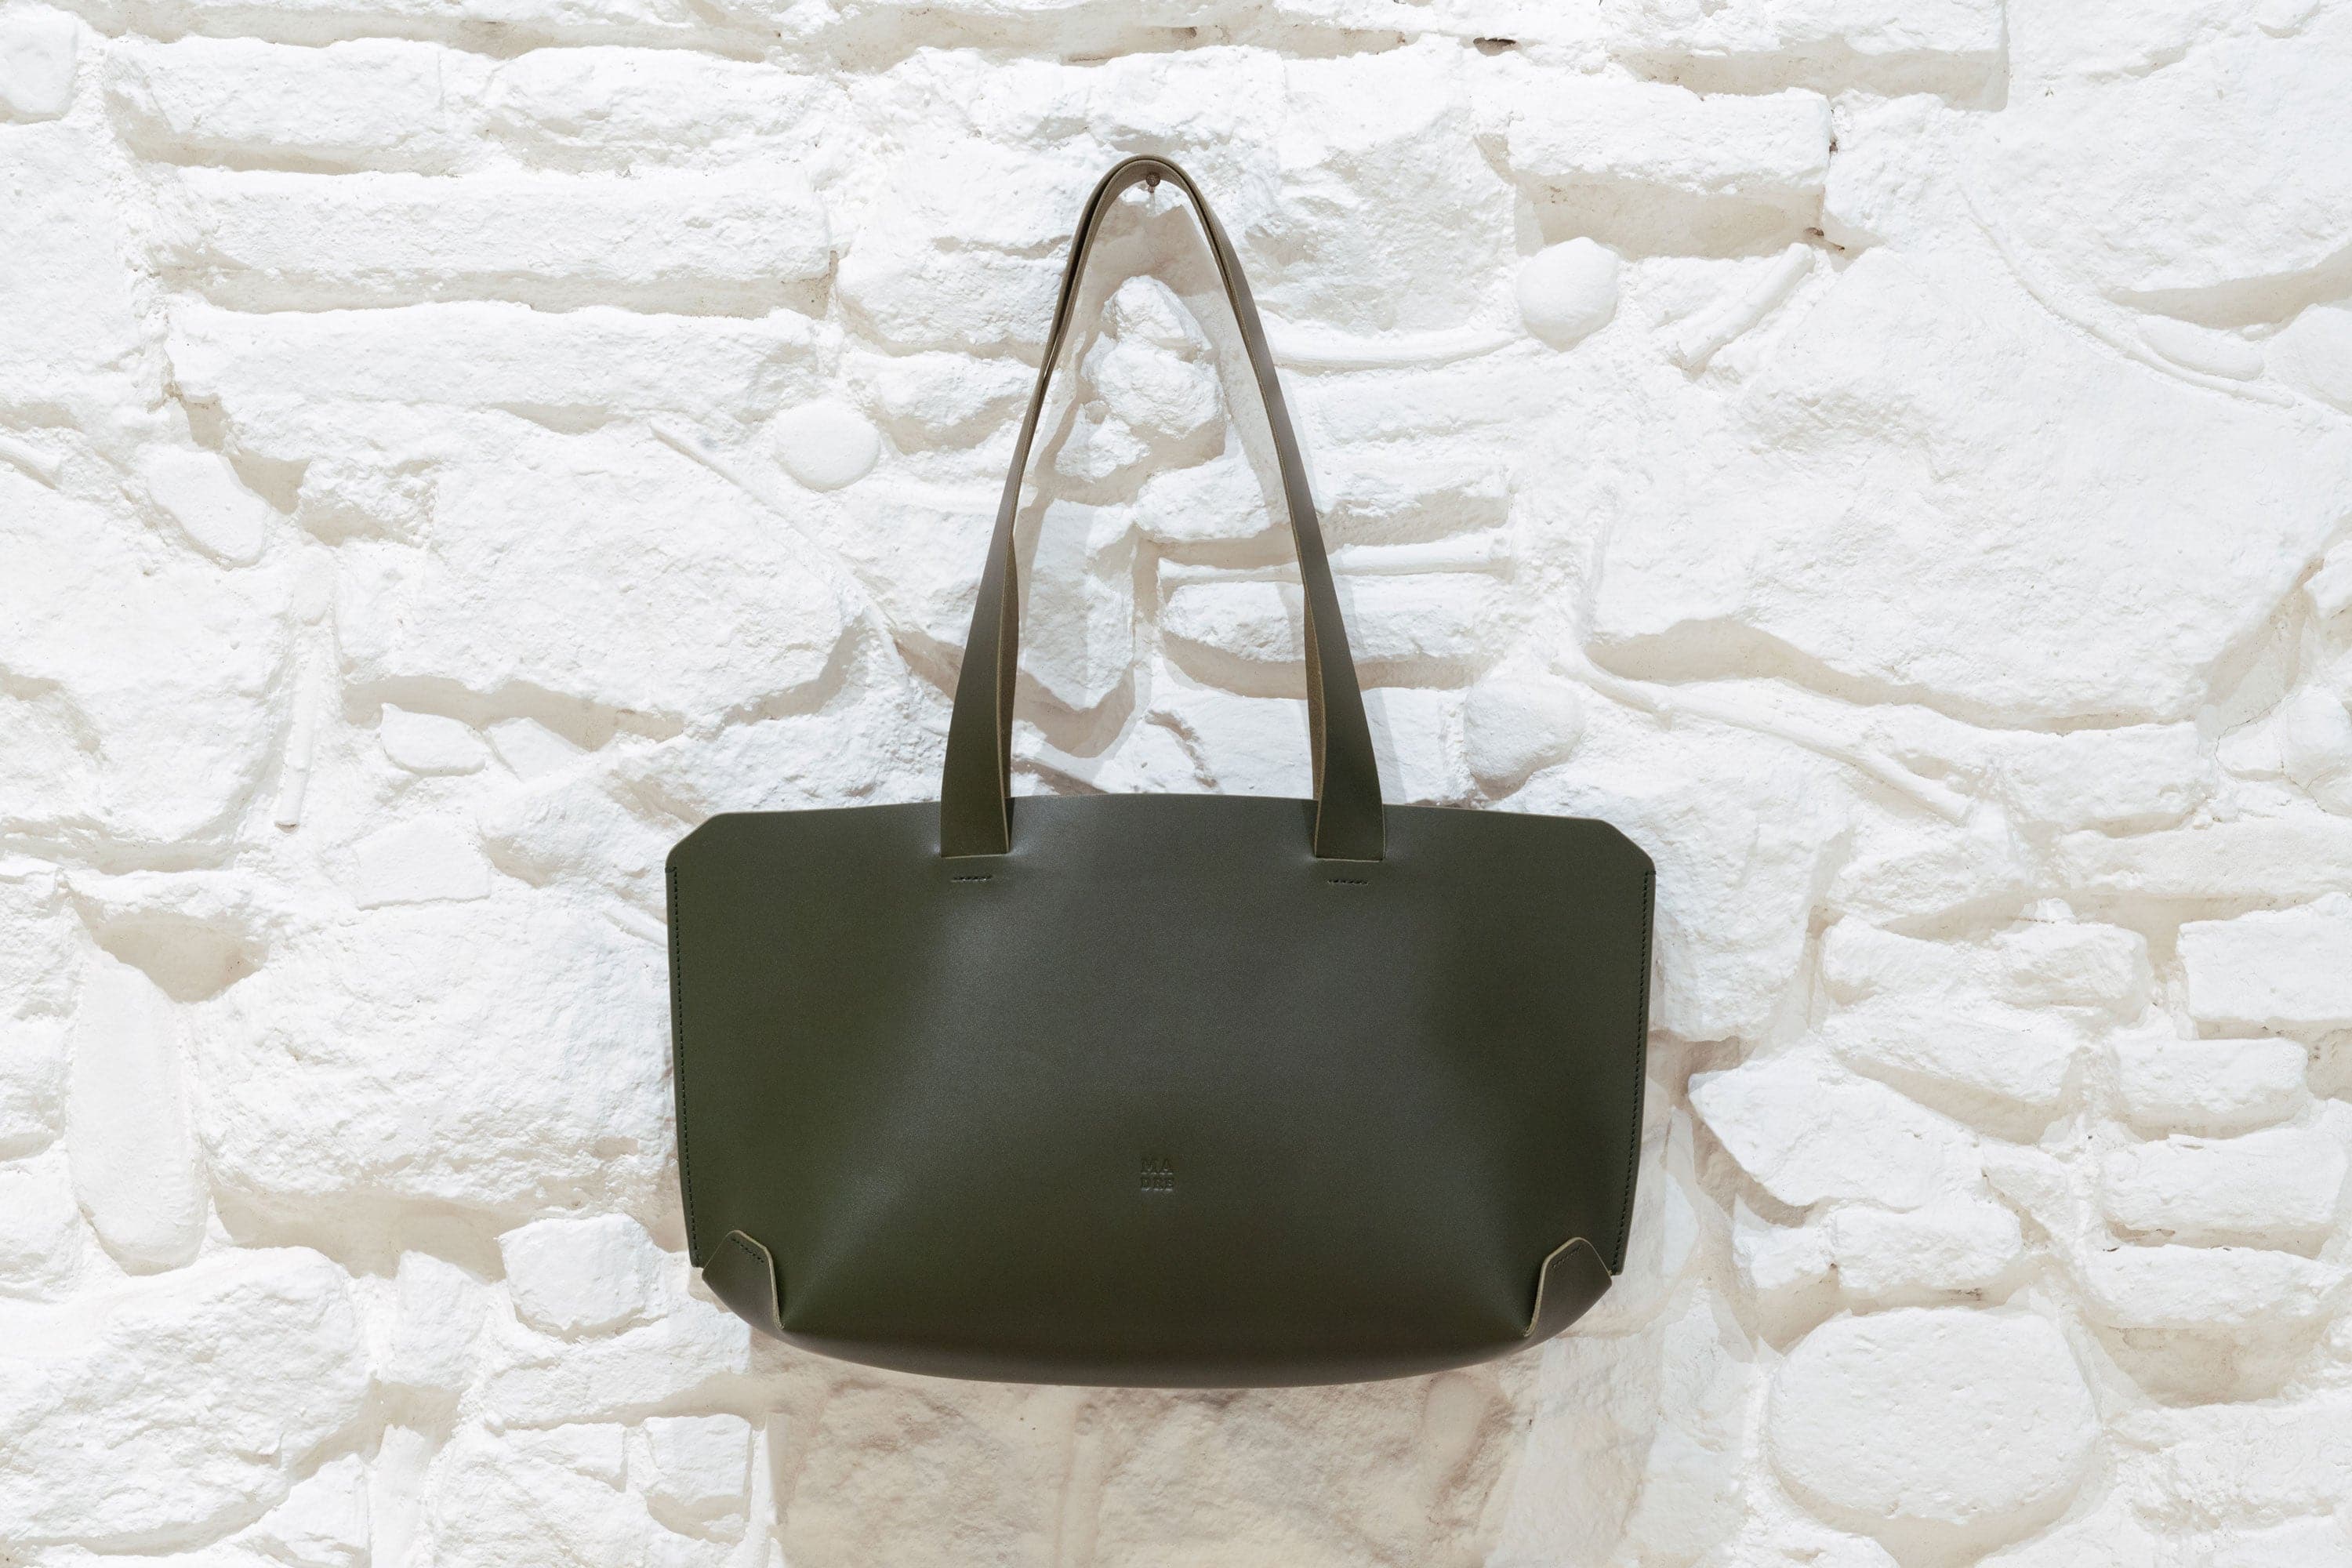 Tote Bag Olive Green Leather Vegetable Tanned Leather Novillo Leather Luxury Quality Design By Manuel Dreesmann Atelier Madre Barcelona Spain